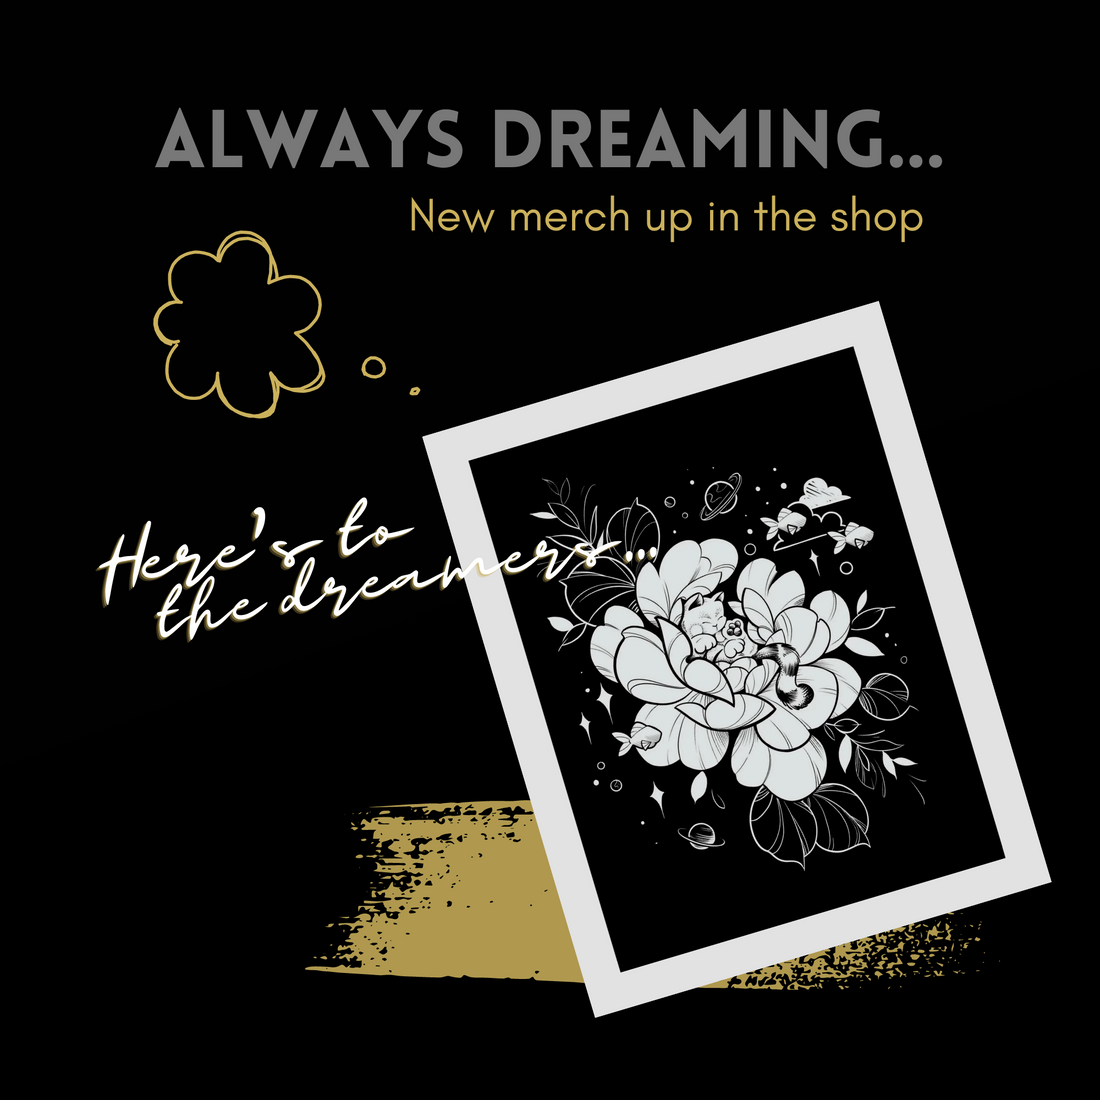 Always dreaming cat and floral design, illustrated by female tattoo artist Lu Loram Martin, Toronto, Canada